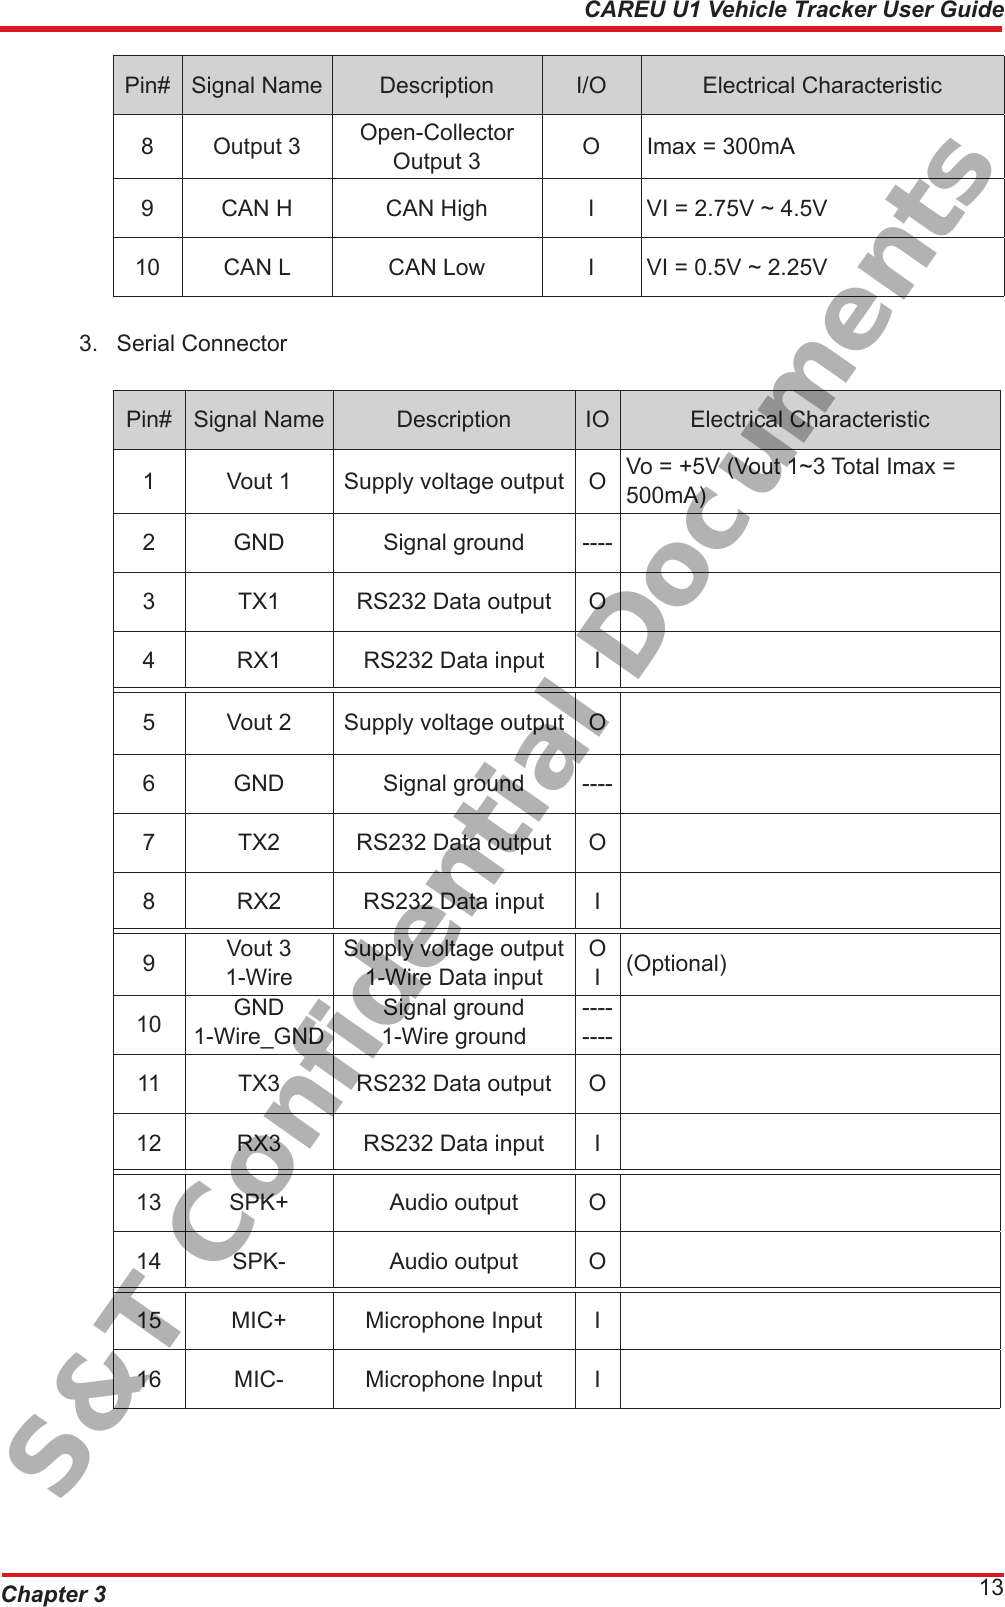 Chapter 3 13CAREU U1 Vehicle Tracker User GuidePin# Signal Name Description I/O Electrical Characteristic8 Output 3 Open-Collector Output 3 O Imax = 300mA9 CAN H CAN High I VI = 2.75V ~ 4.5V10 CAN L CAN Low I VI = 0.5V ~ 2.25V3.  Serial ConnectorPin# Signal Name Description IO Electrical Characteristic1 Vout 1 Supply voltage output O Vo = +5V (Vout 1~3 Total Imax = 500mA)2 GND Signal ground ----3 TX1 RS232 Data output O4 RX1 RS232 Data input I5 Vout 2 Supply voltage output O6 GND Signal ground ----7 TX2 RS232 Data output O8 RX2 RS232 Data input I9Vout 31-WireSupply voltage output1-Wire Data inputOI(Optional)10 GND1-Wire_GNDSignal ground1-Wire ground--------11 TX3 RS232 Data output O12 RX3 RS232 Data input I13 SPK+ Audio output O14 SPK- Audio output O15 MIC+ Microphone Input I16 MIC- Microphone Input IS&amp;T Confidential Documents